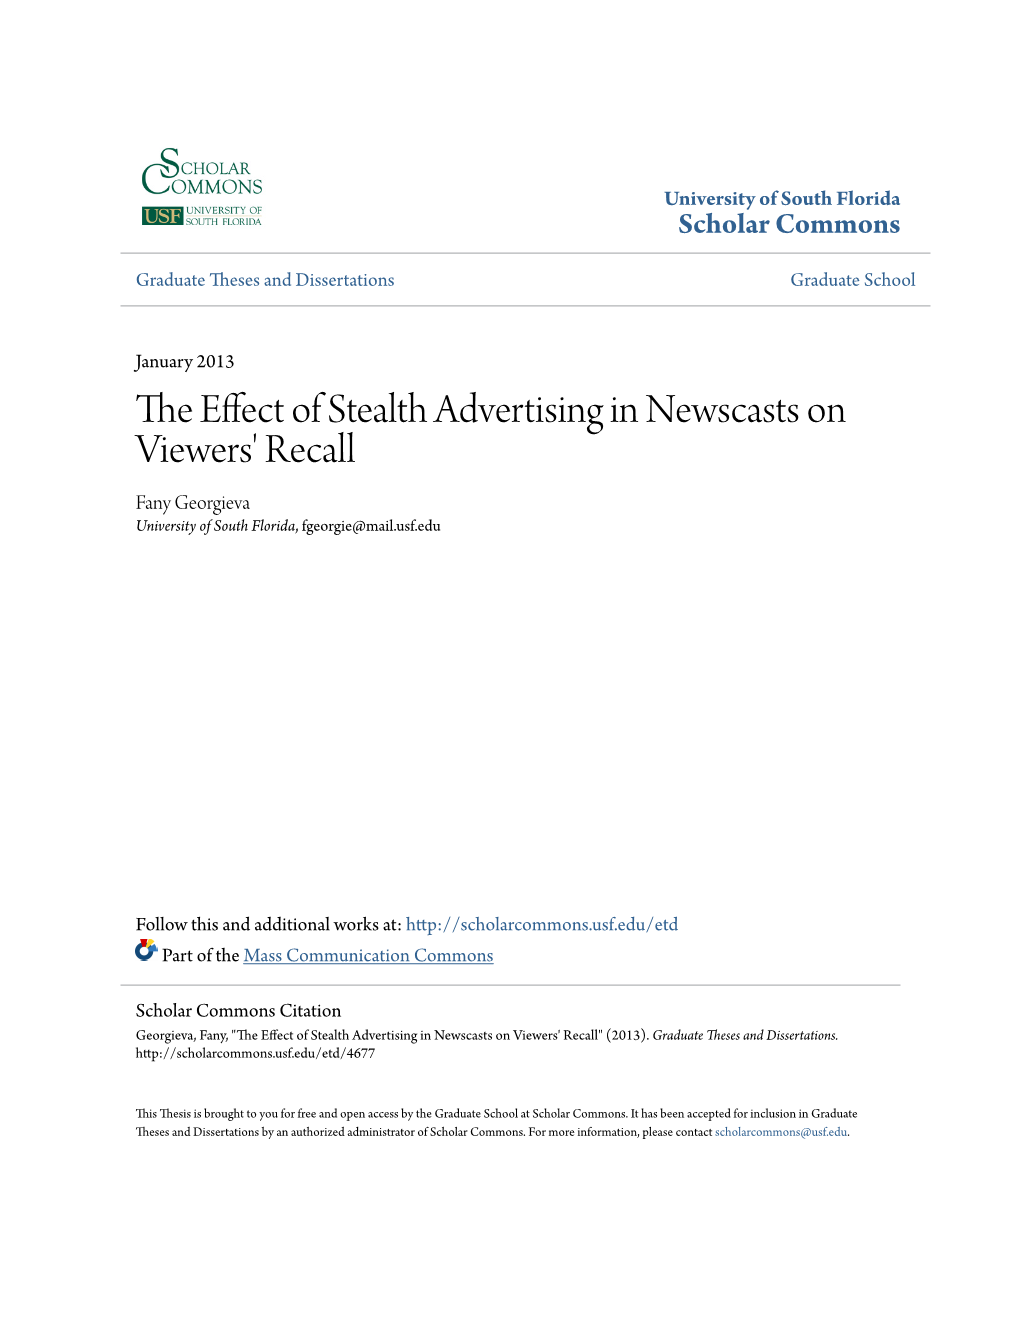 The Effect of Stealth Advertising in Newscasts on Viewers' Recall" (2013)